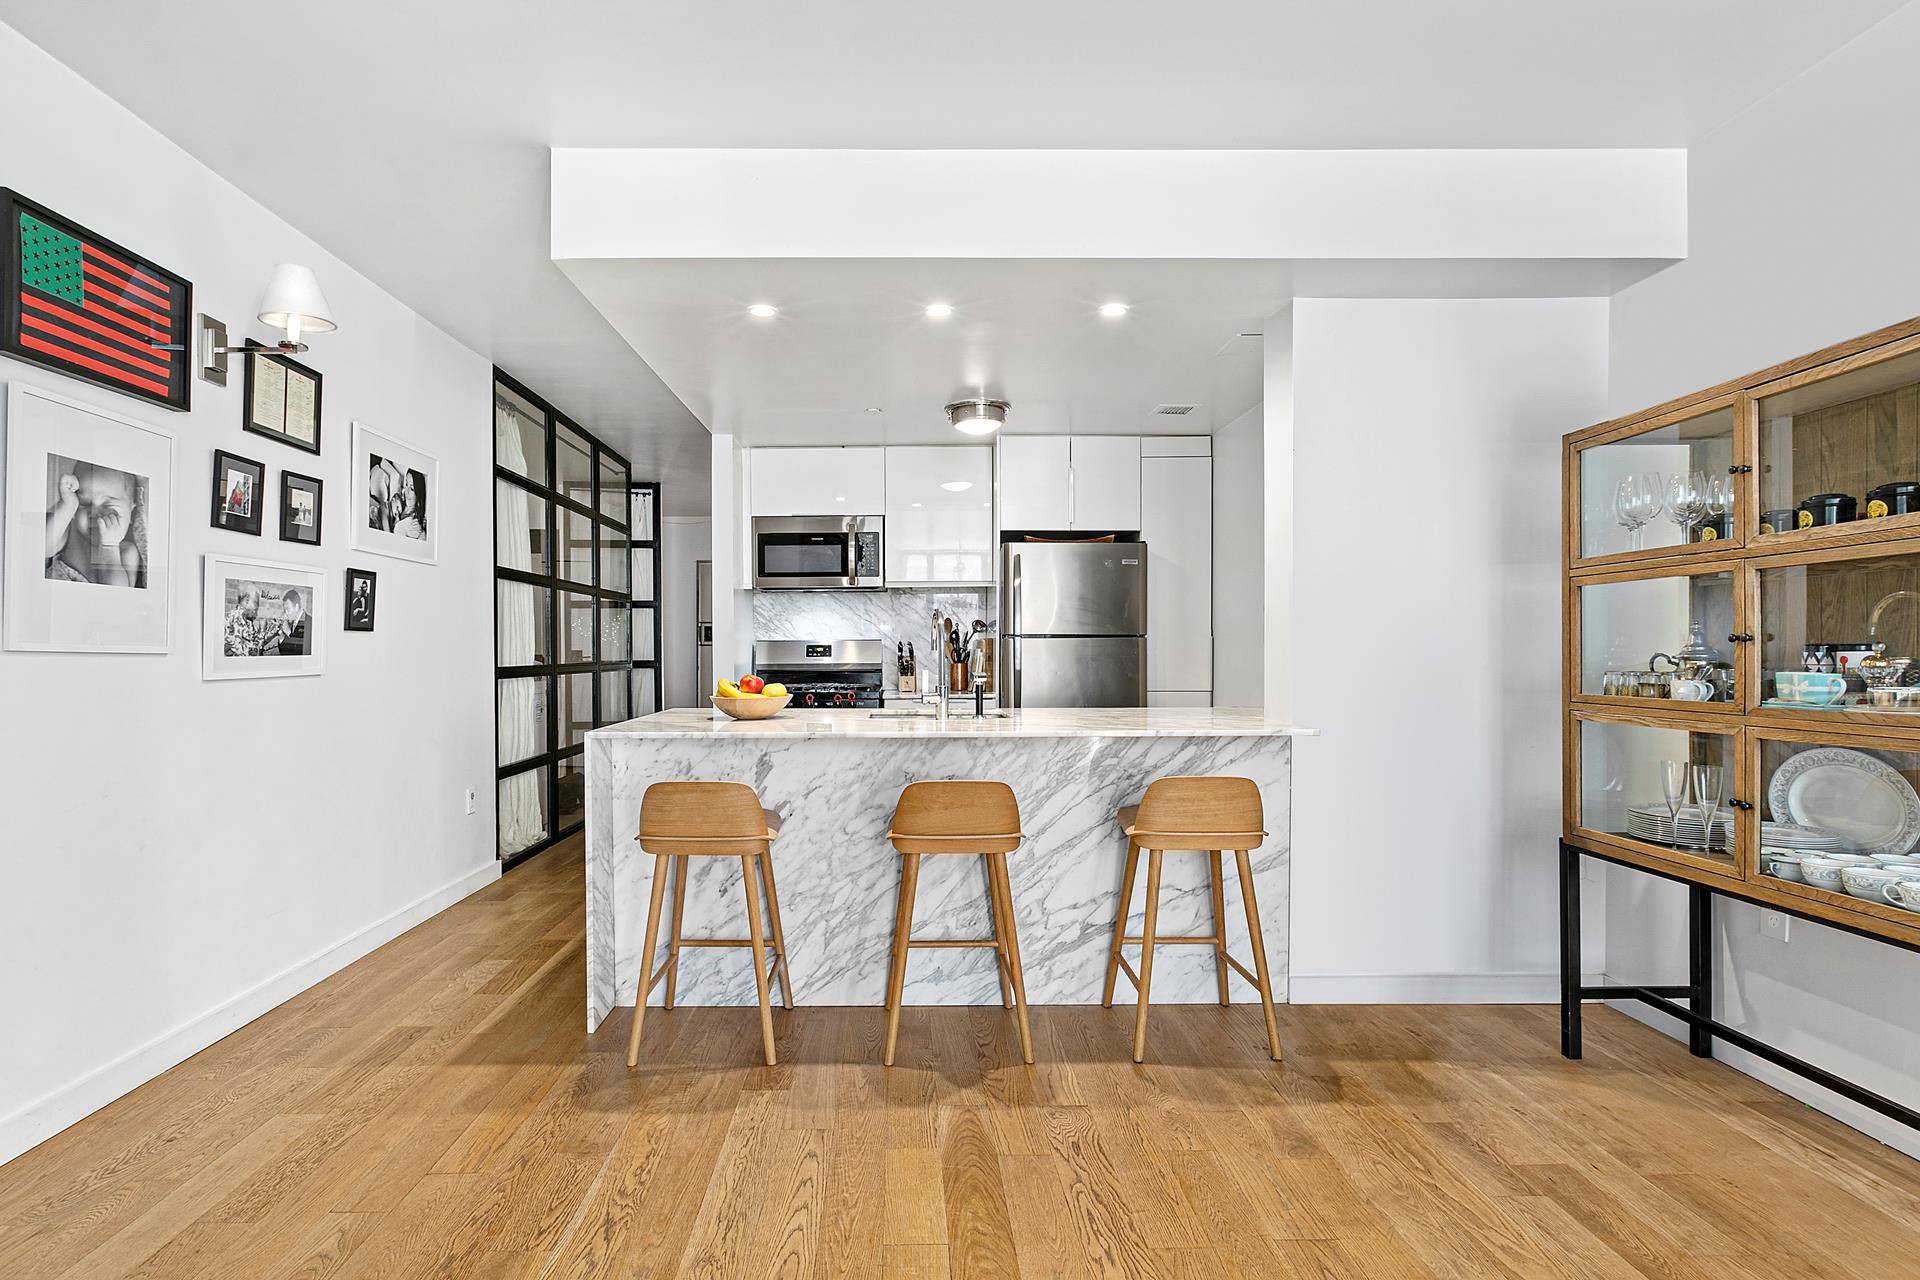 Truly one of its kind, this expansive two bedroom two bathroom home sits in one of the most architecturally striking luxury condominiums in Central Harlem.